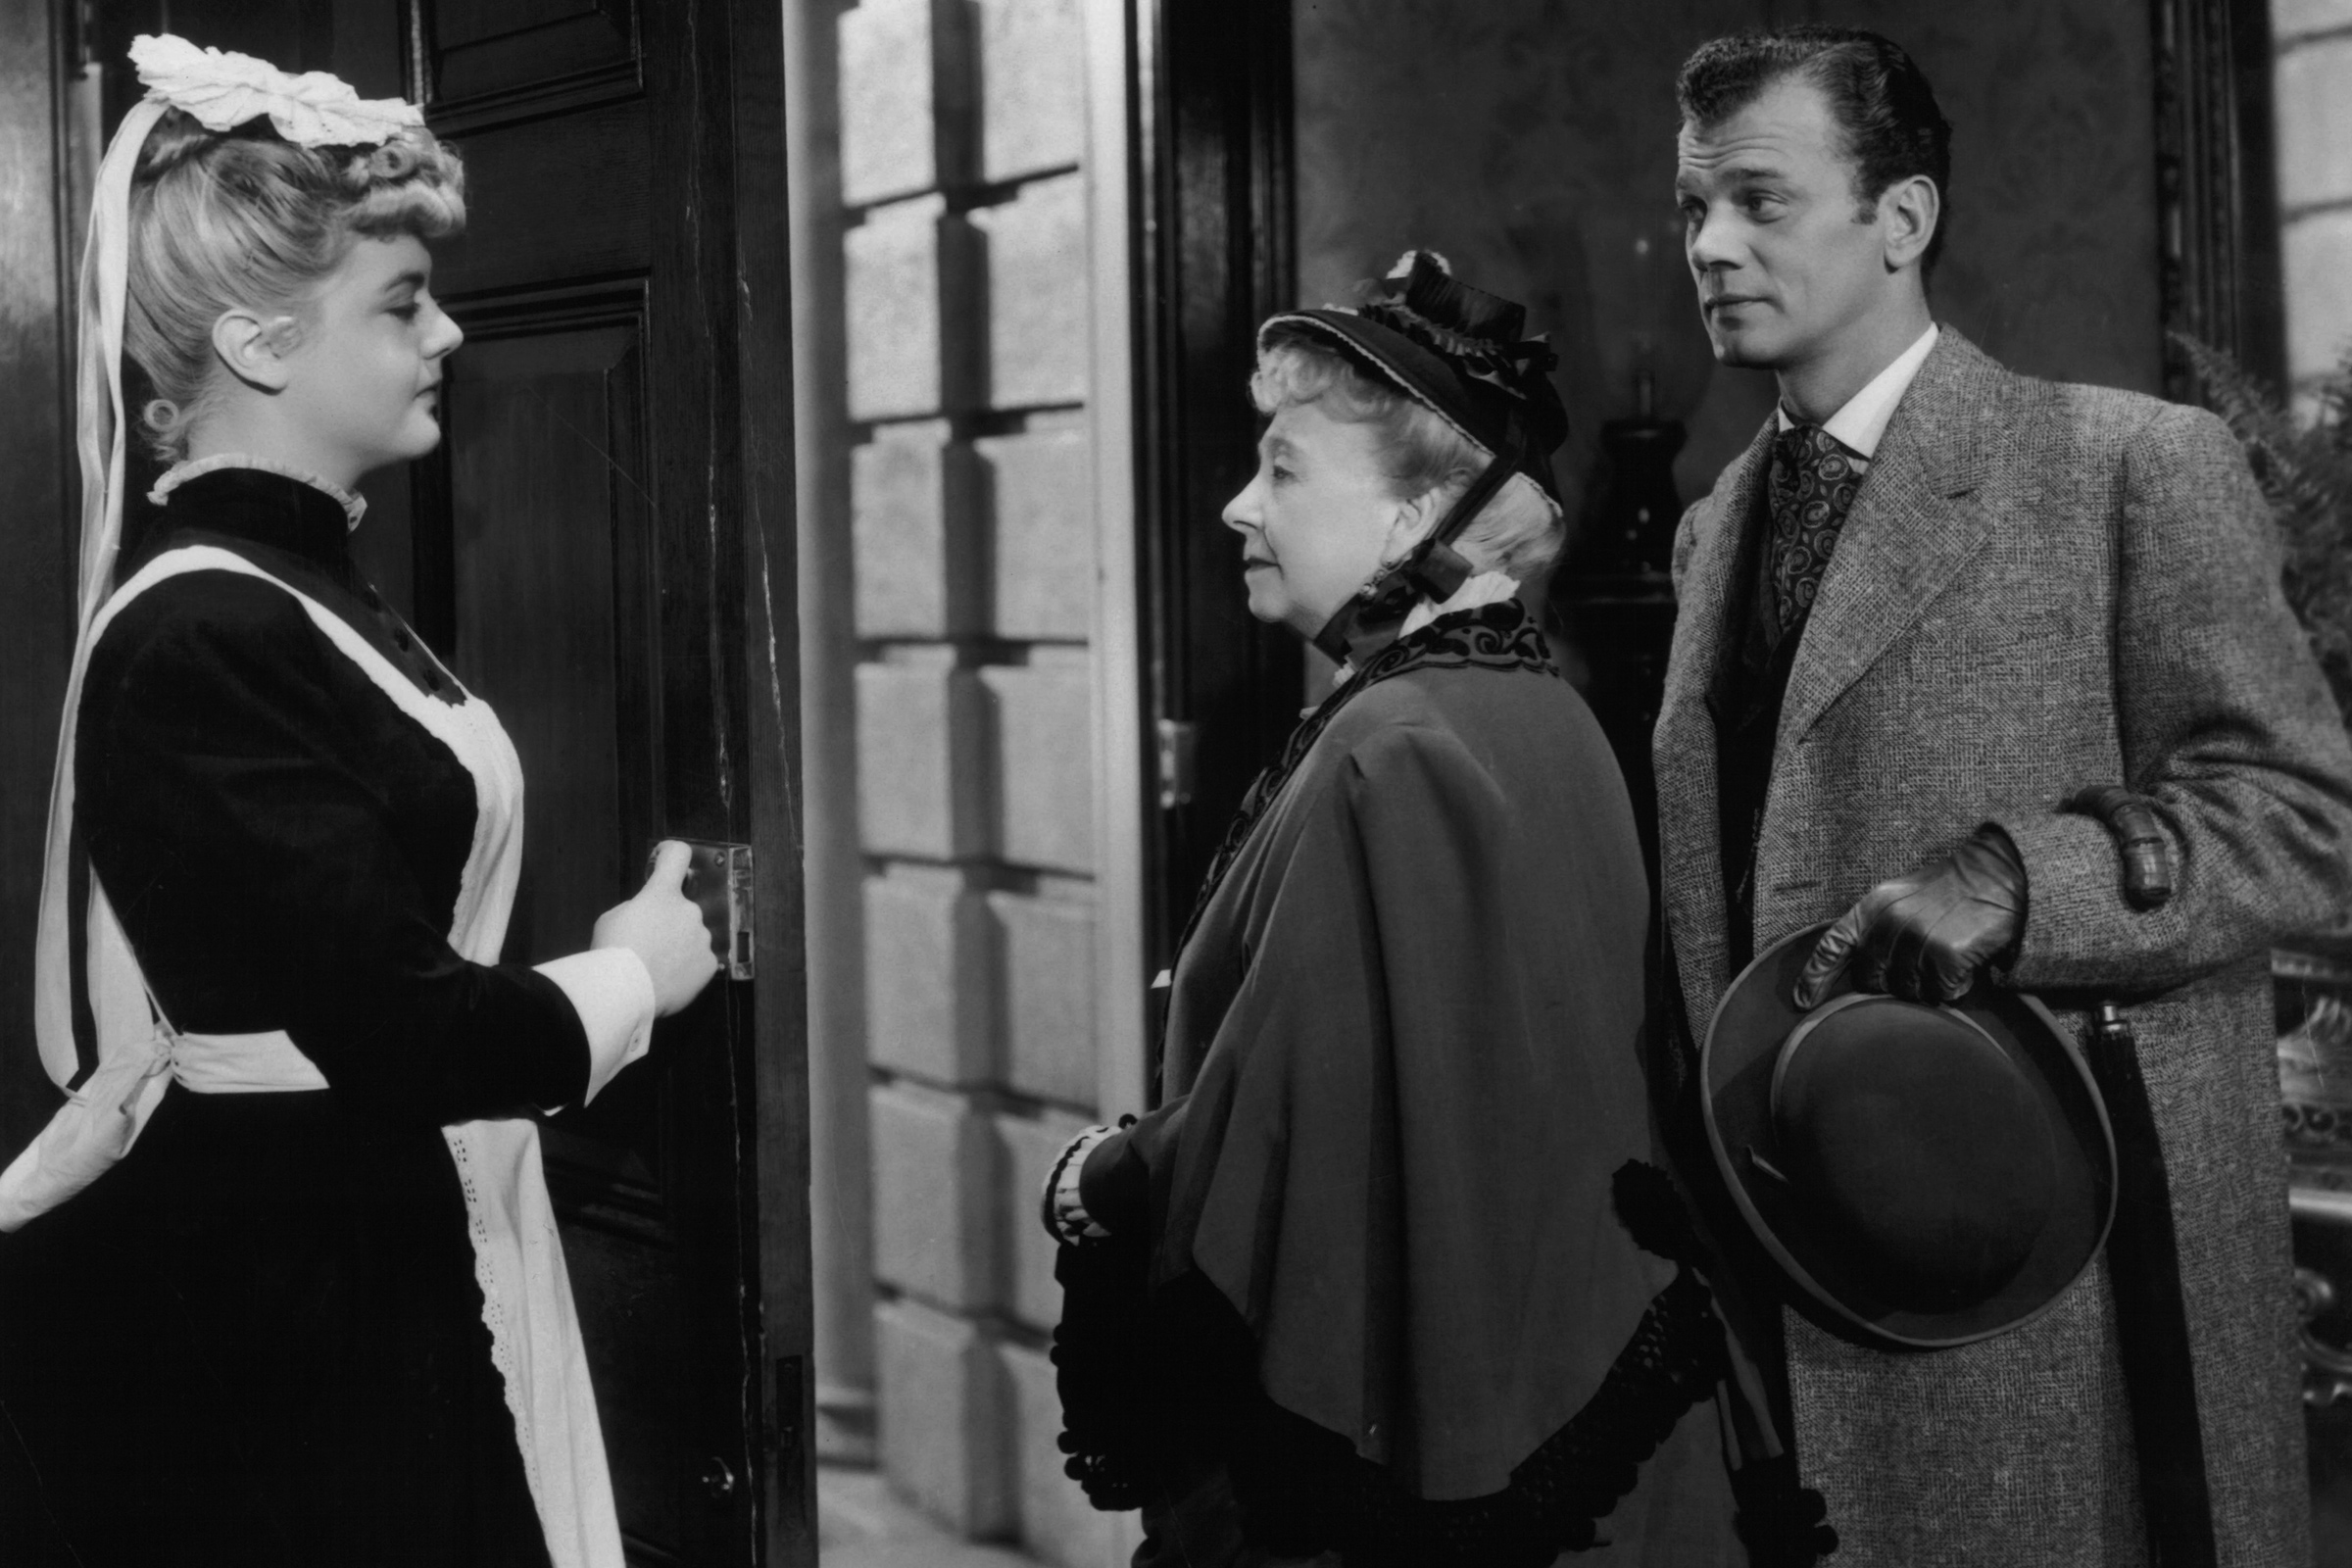 Angela Lansbury opens the door for Dame May Whitty and Joseph Cotten in a scene from the film 'Gaslight', in 1944.